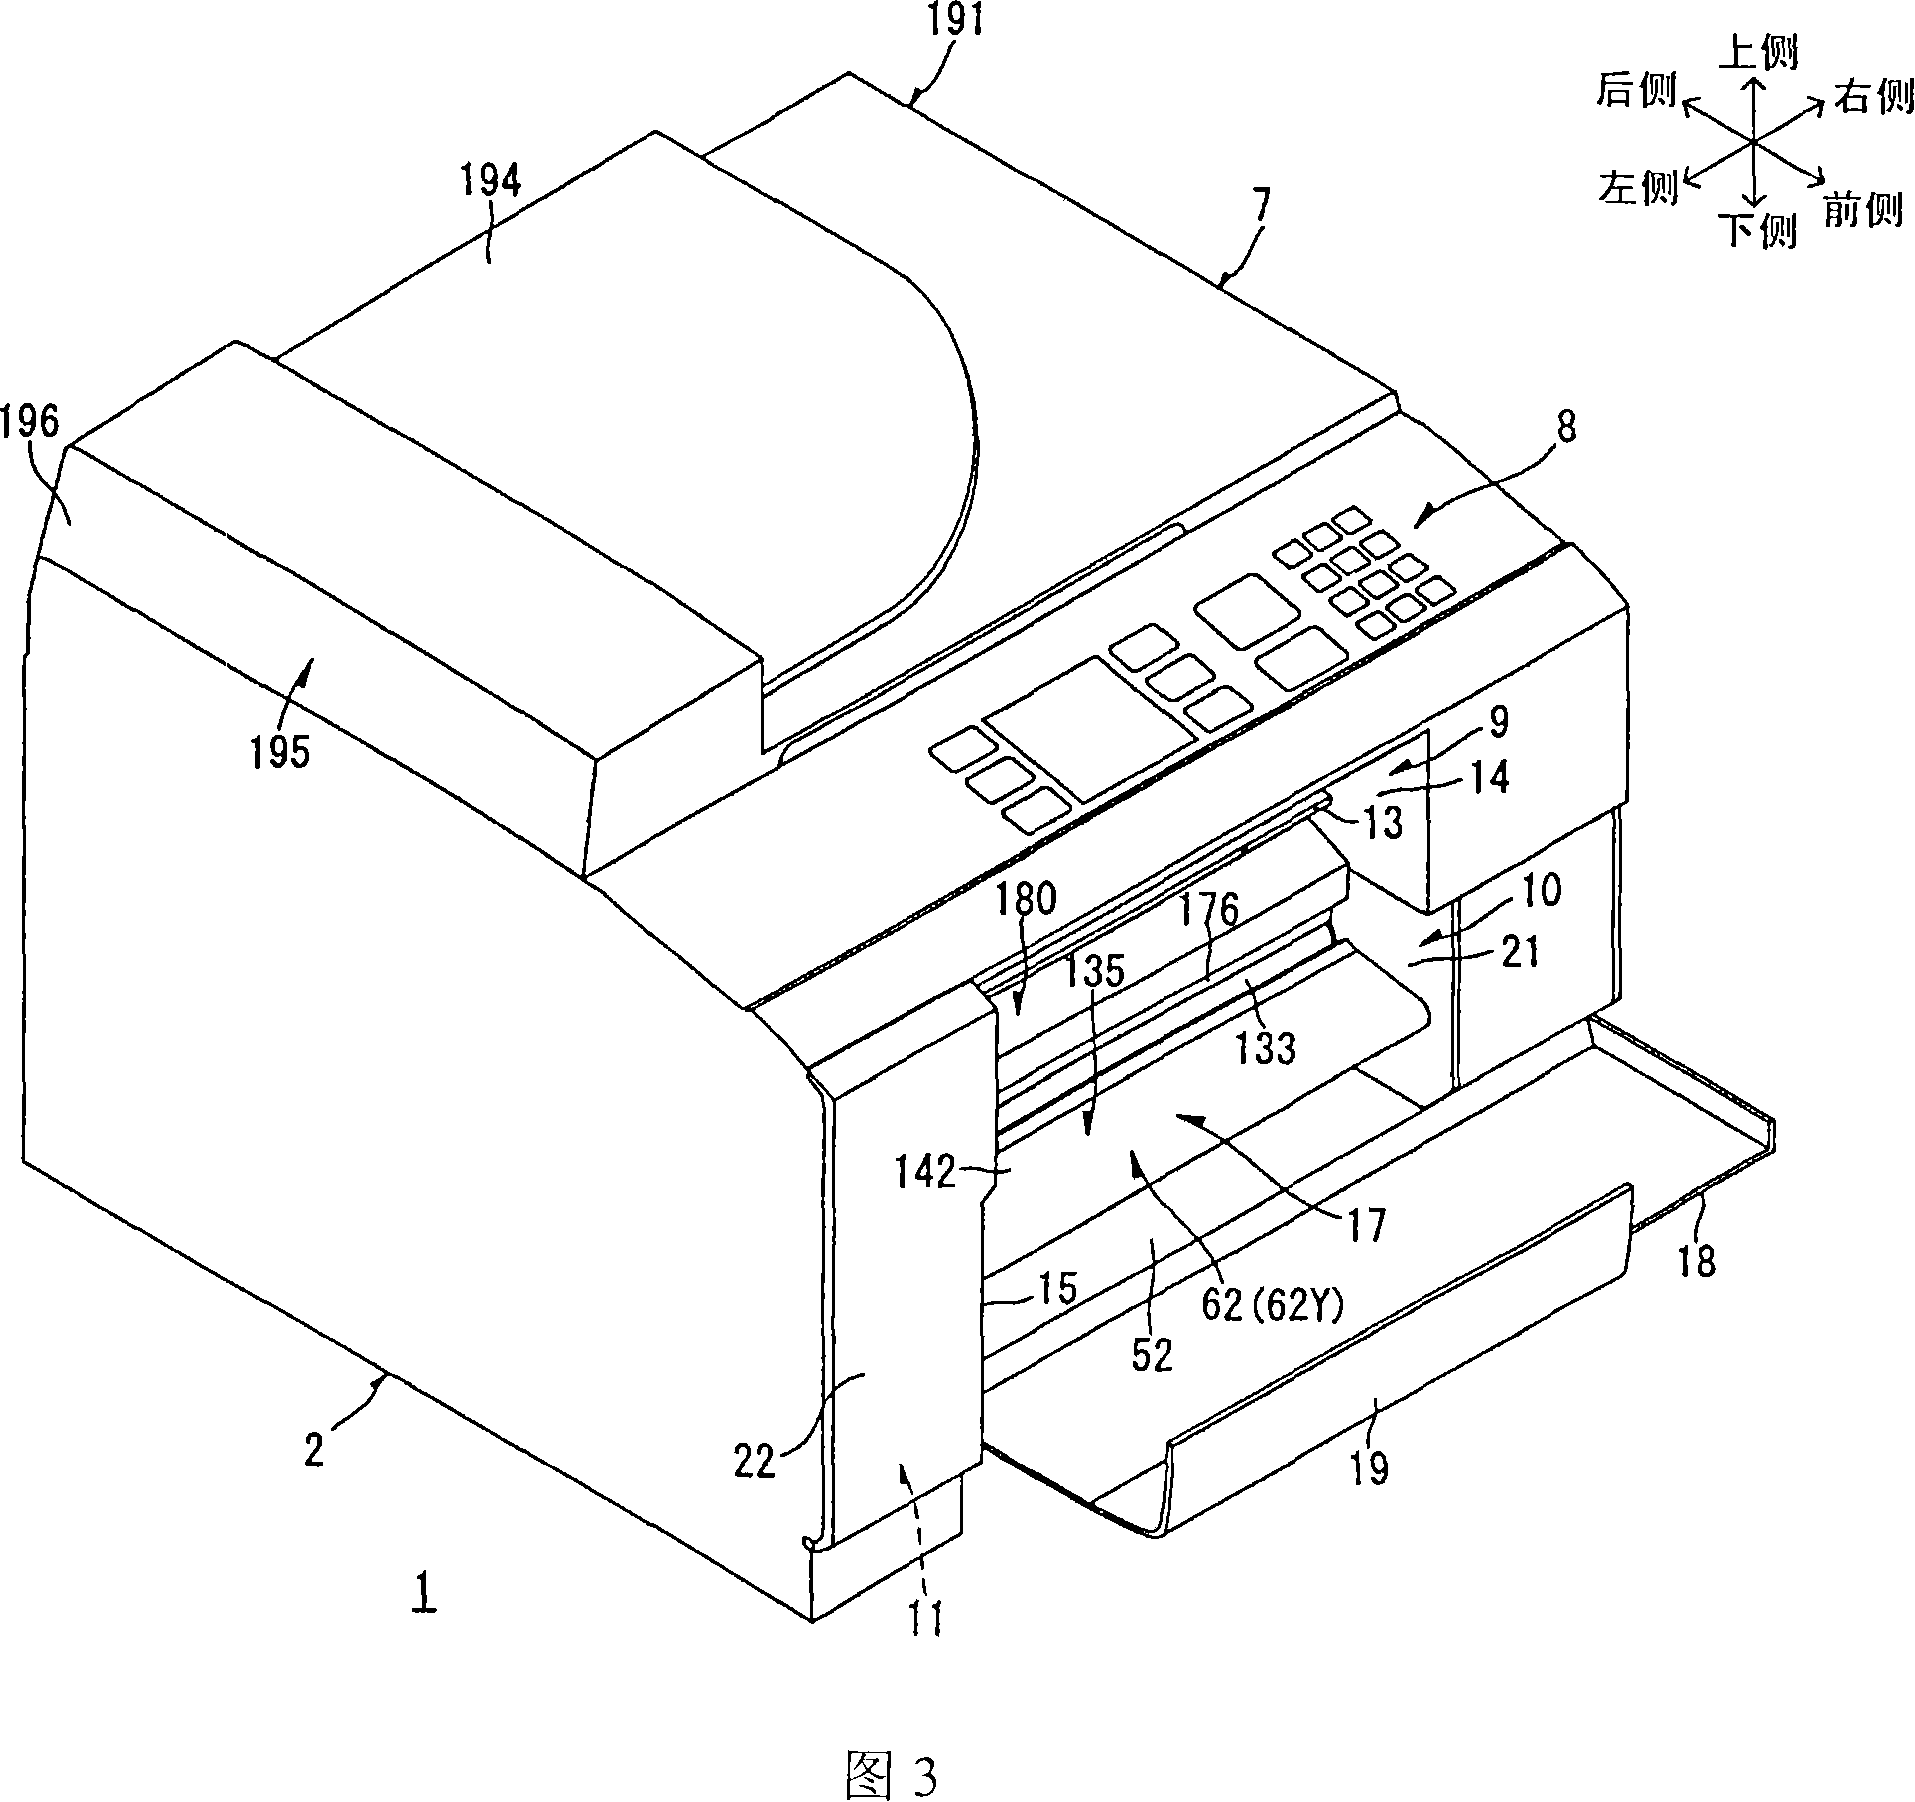 Image forming apparatus and developing agent cartridge